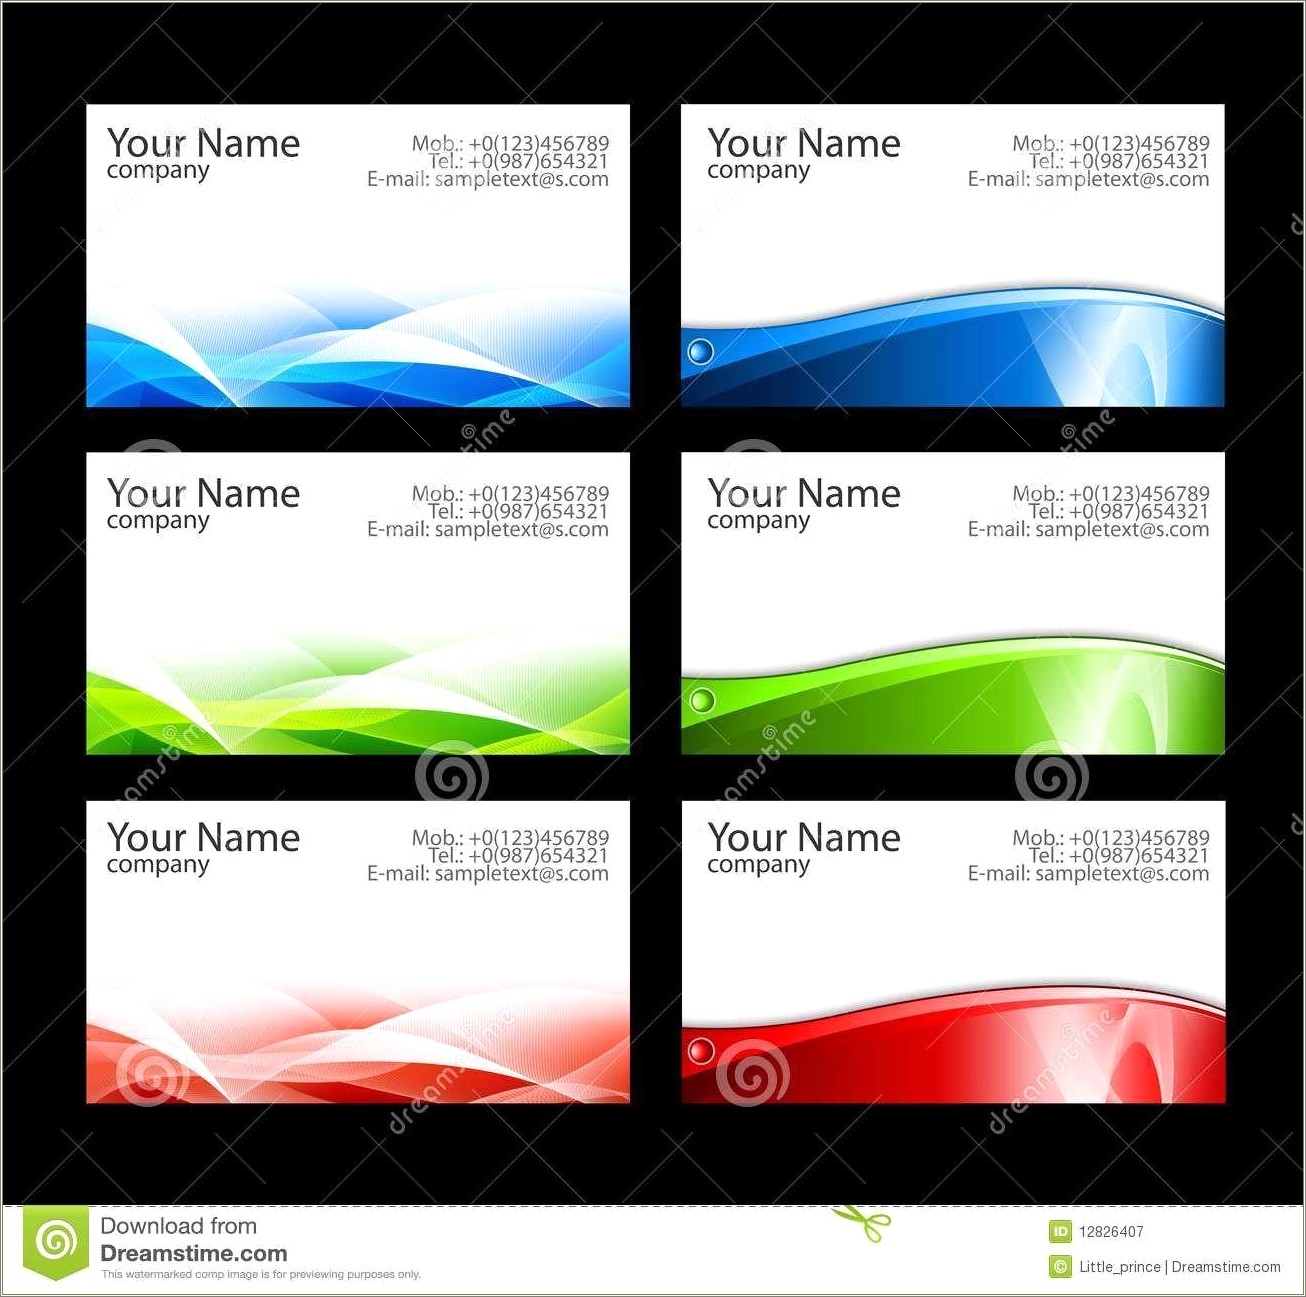 Free Avery Business Card Template 5371